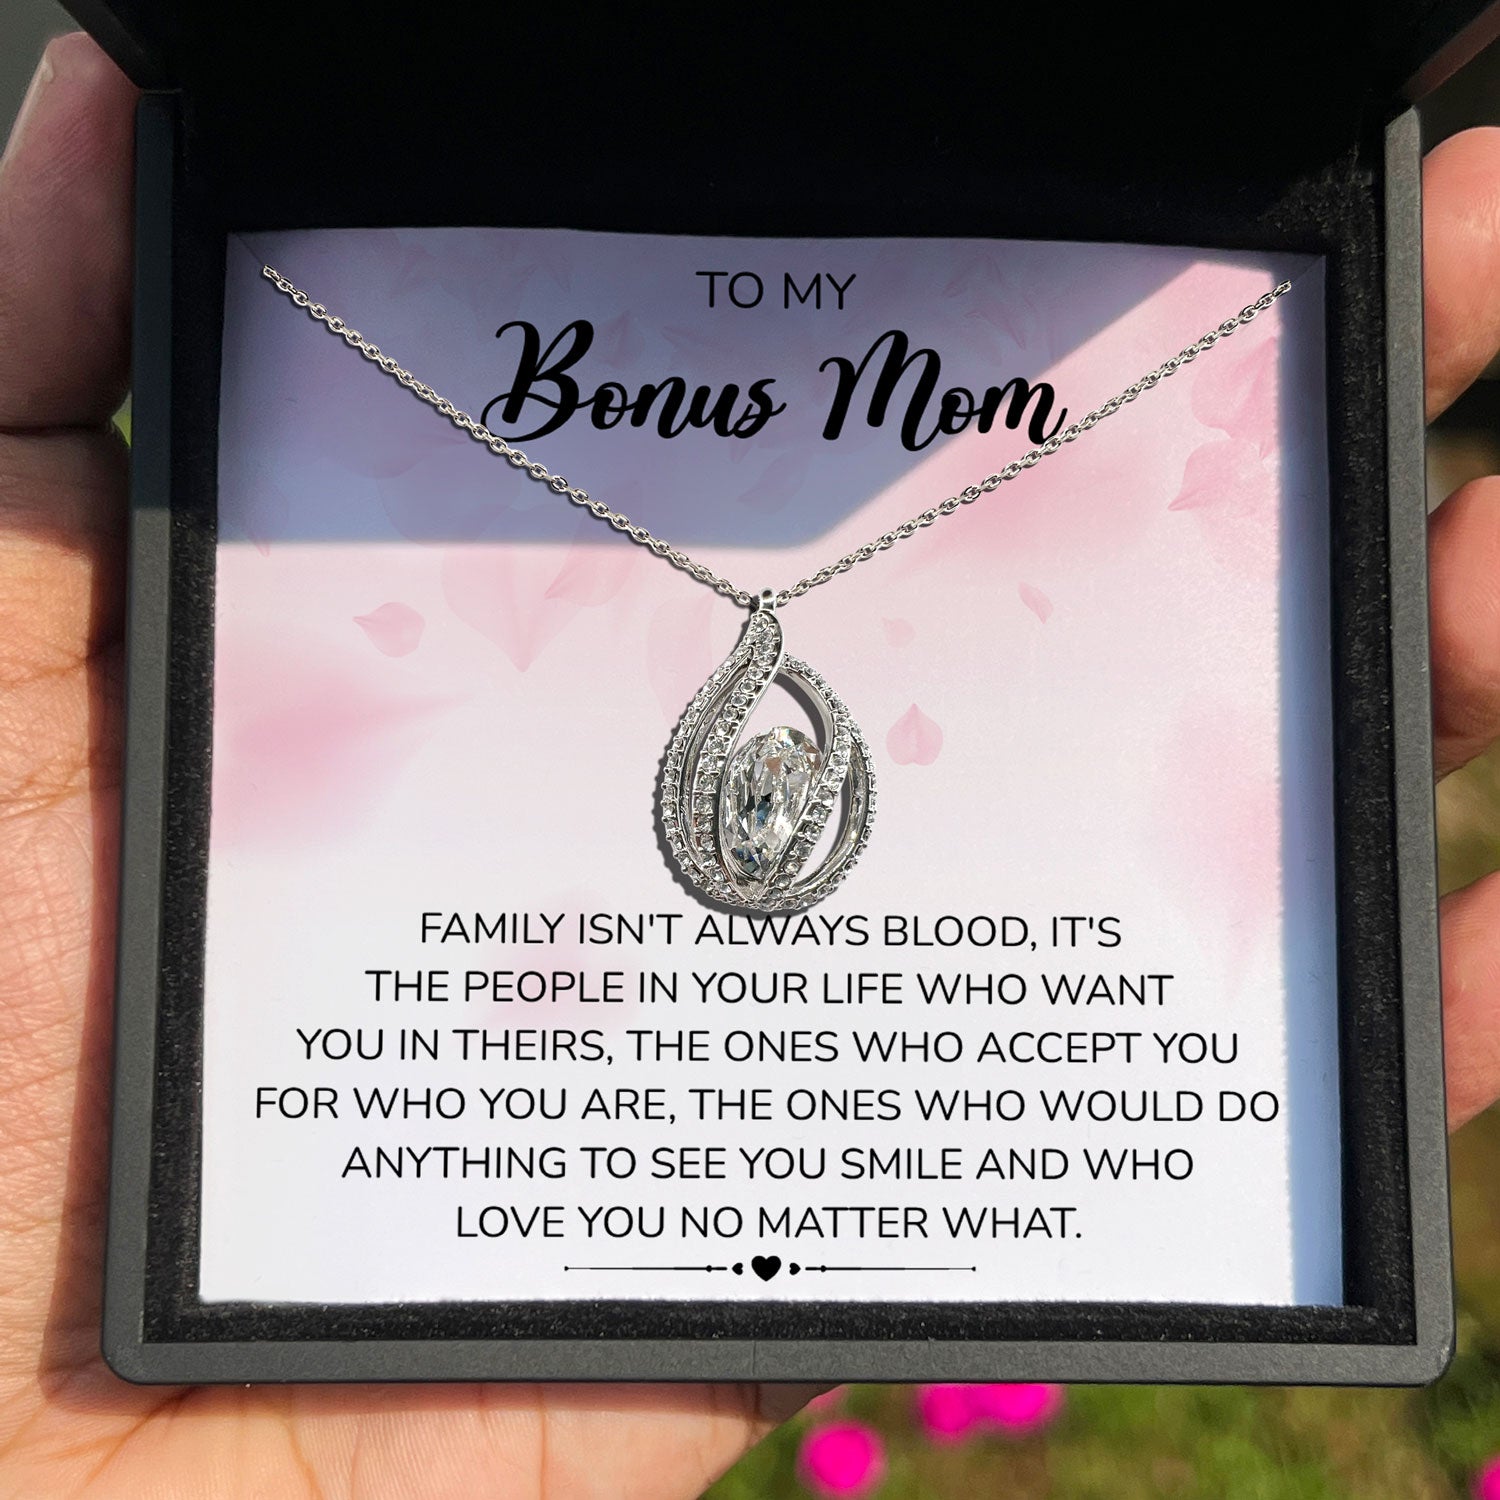 To My Bonus Mom - Family Isn't Always Blood,It's The People In Your Life Who Want You In Theirs - Orbital Birdcage Necklace